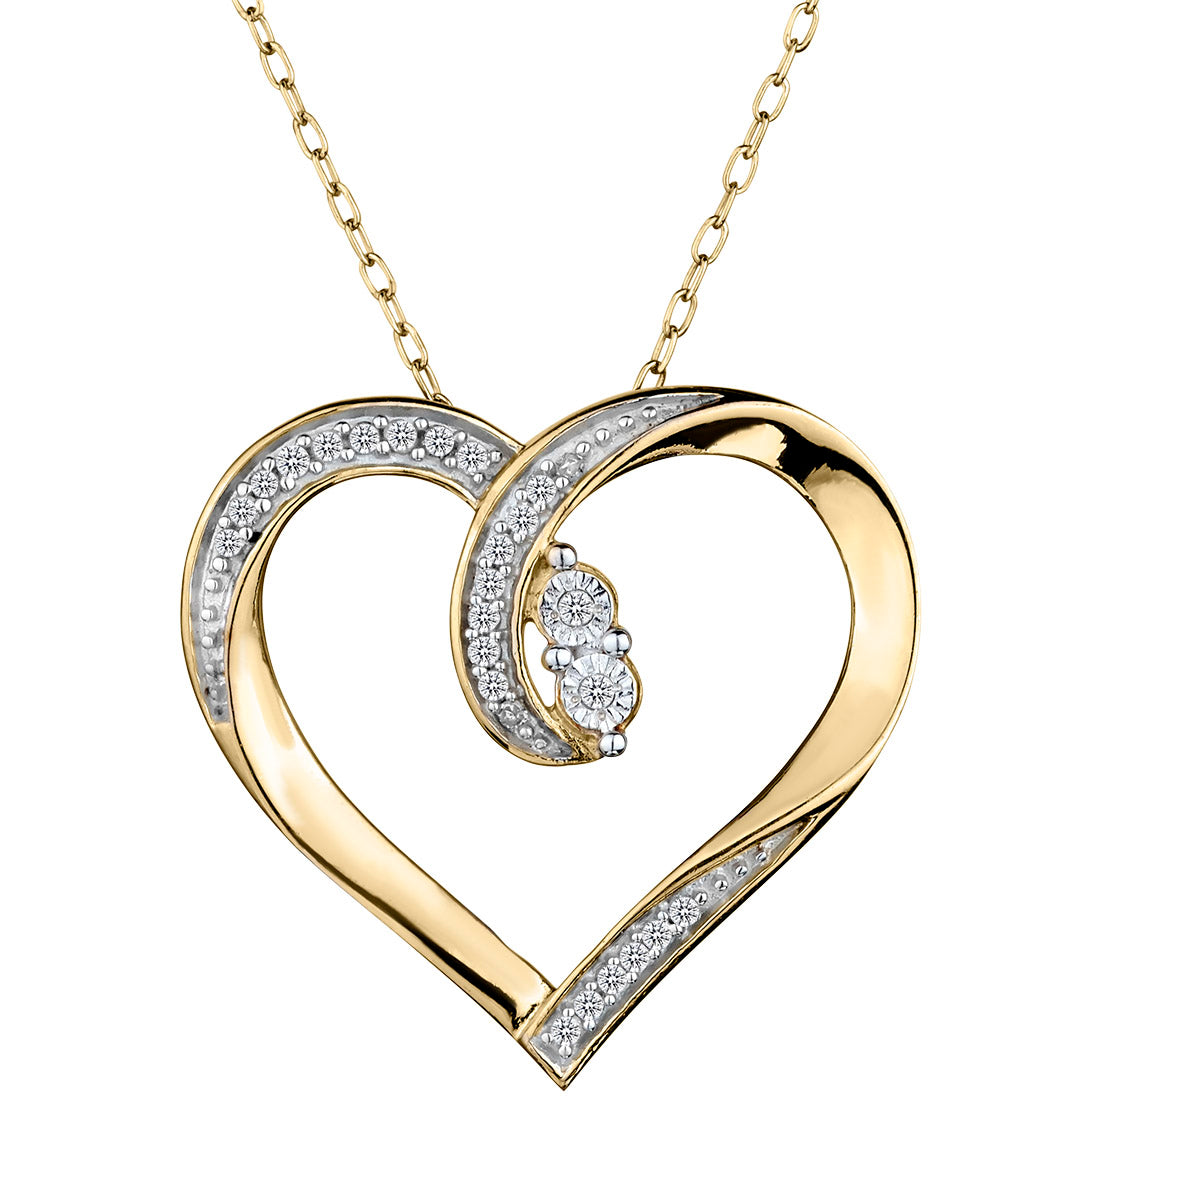 .10 Carat Heart Pendant, Sterling Silver, Gold Plated.......................NOW